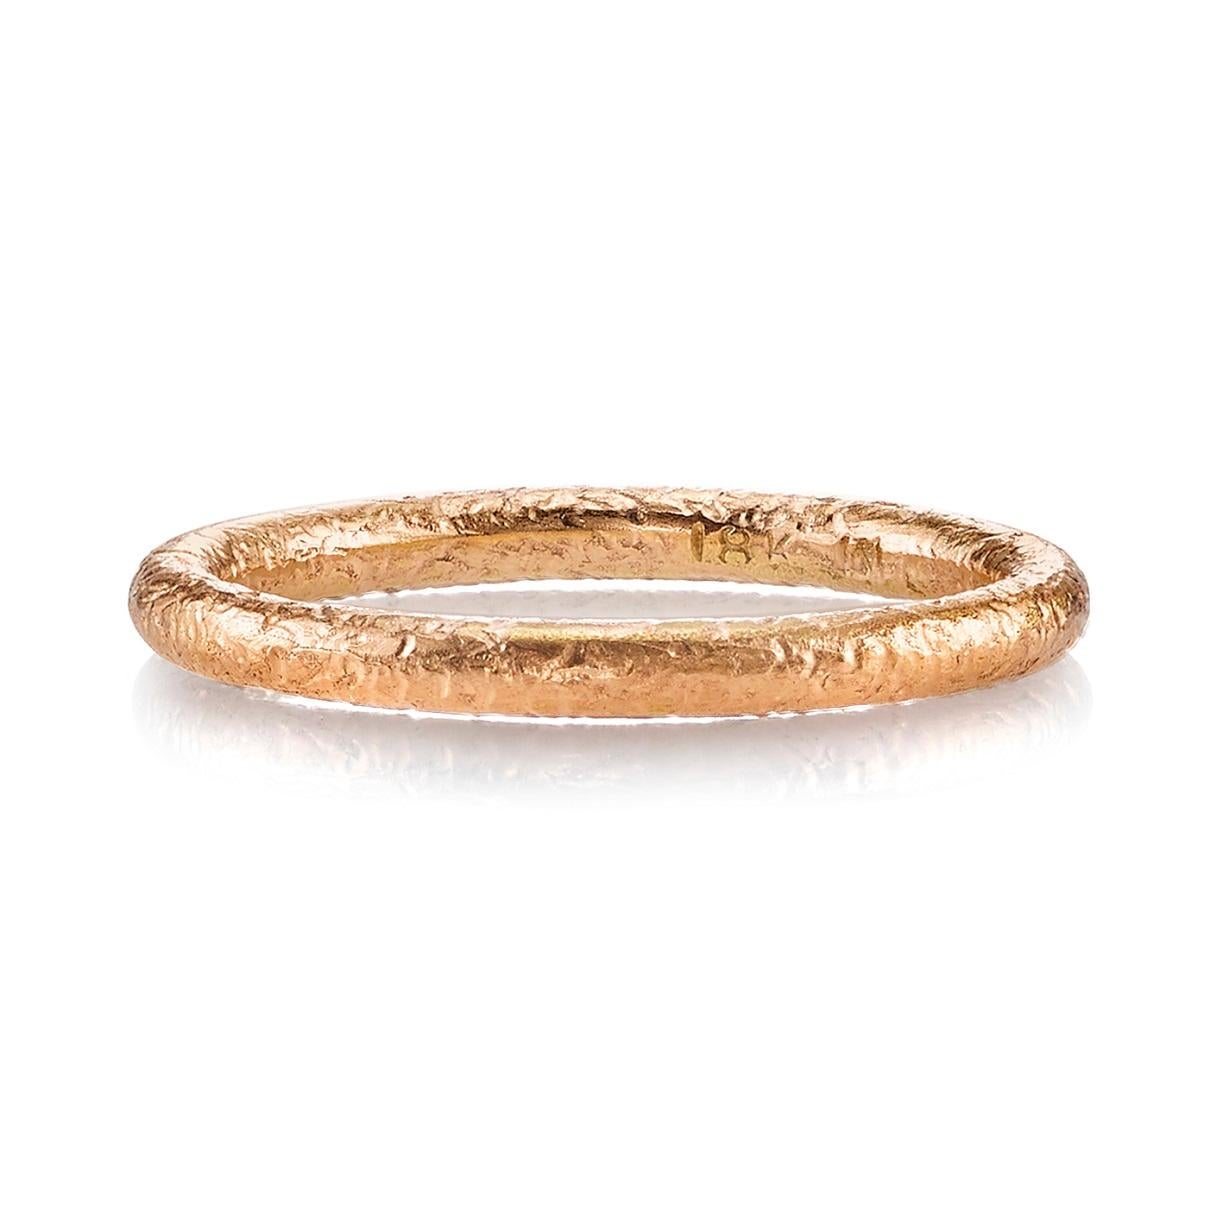 2.0mm handcrafted hammered gold band.  

Band is available in 22K yellow, 18K rose and 18K champagne white gold. Price shown is for 22K yellow gold. 

Our jewelry is made locally in Los Angeles and most pieces are made to order. For these